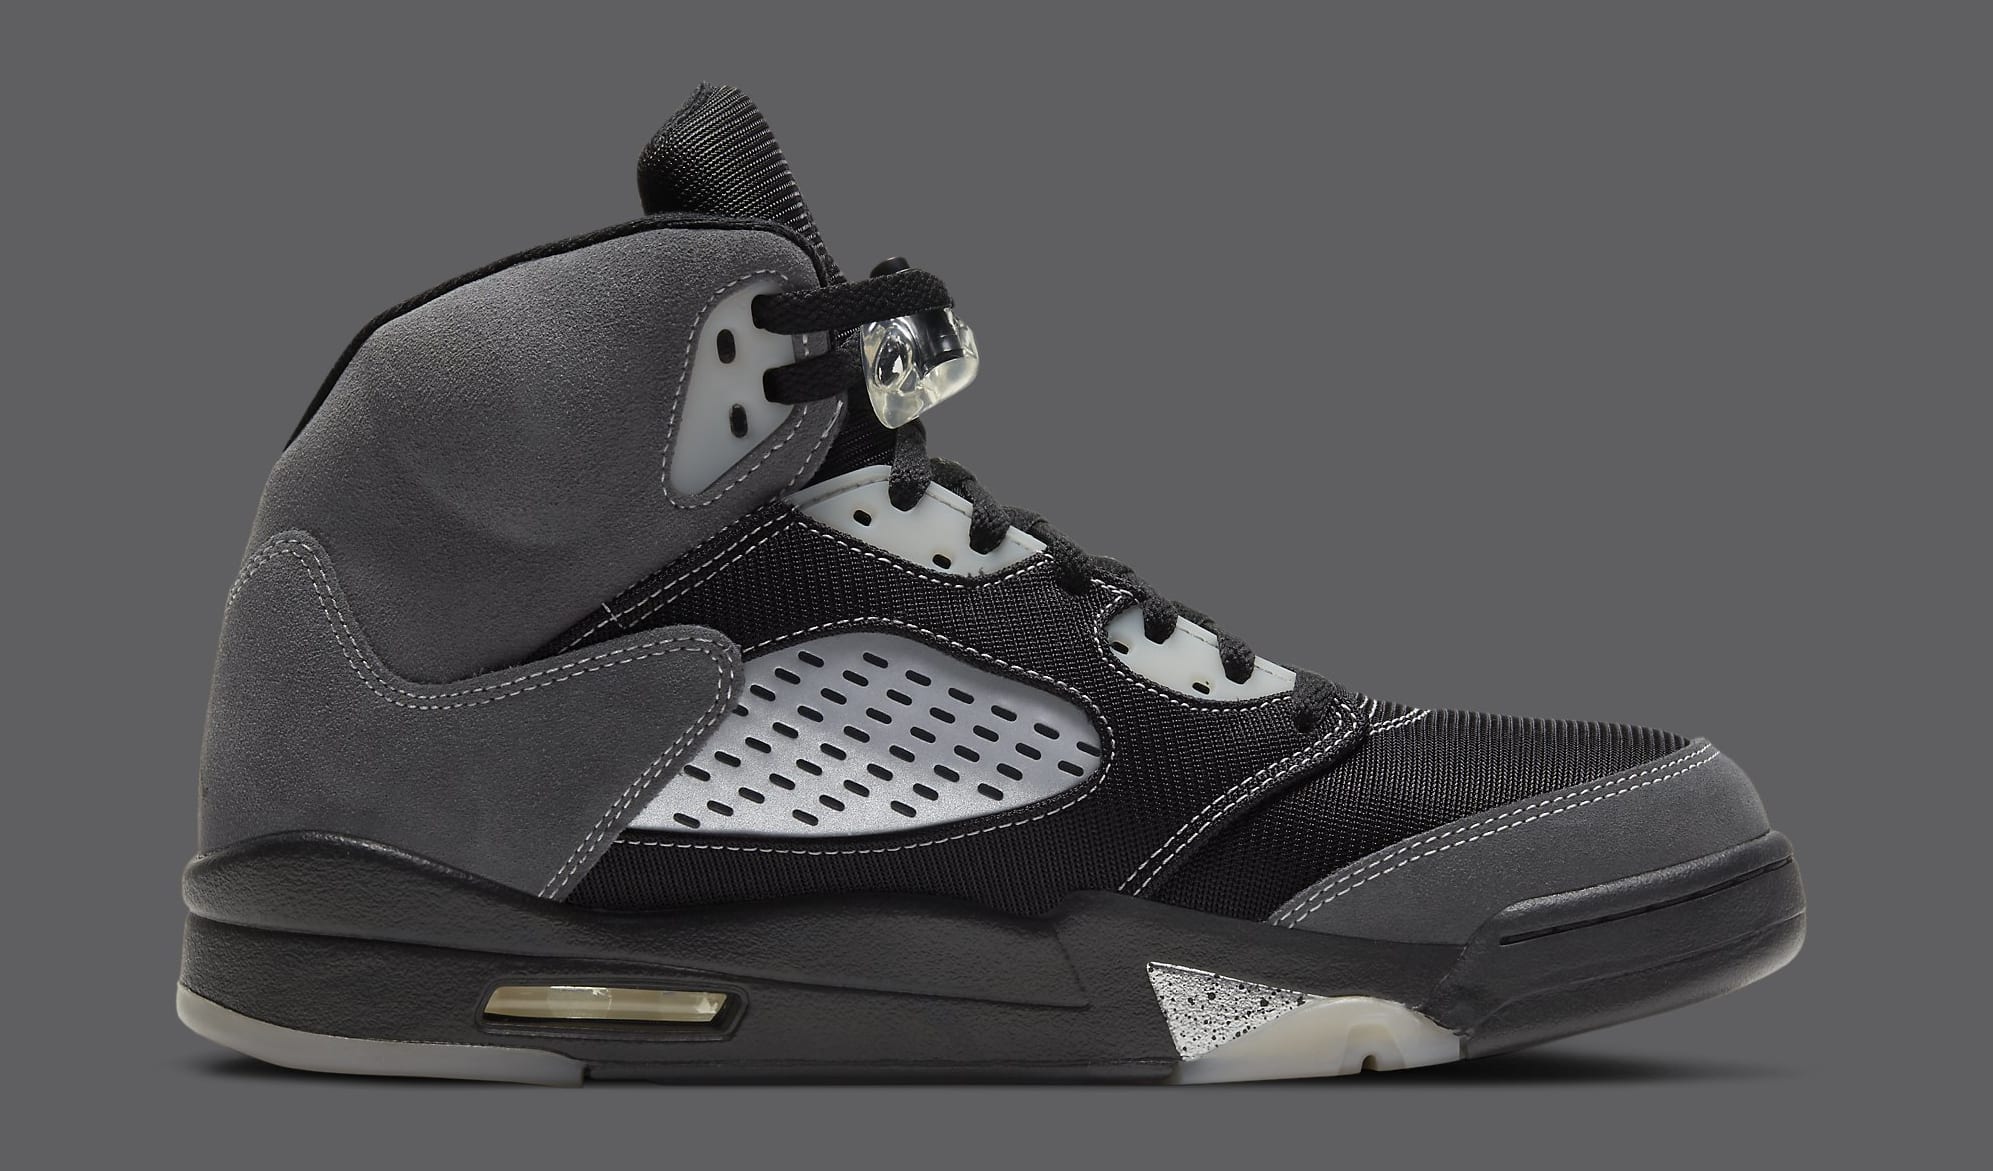 Best Look Yet at the 'Anthracite' Air Jordan 5 | Complex